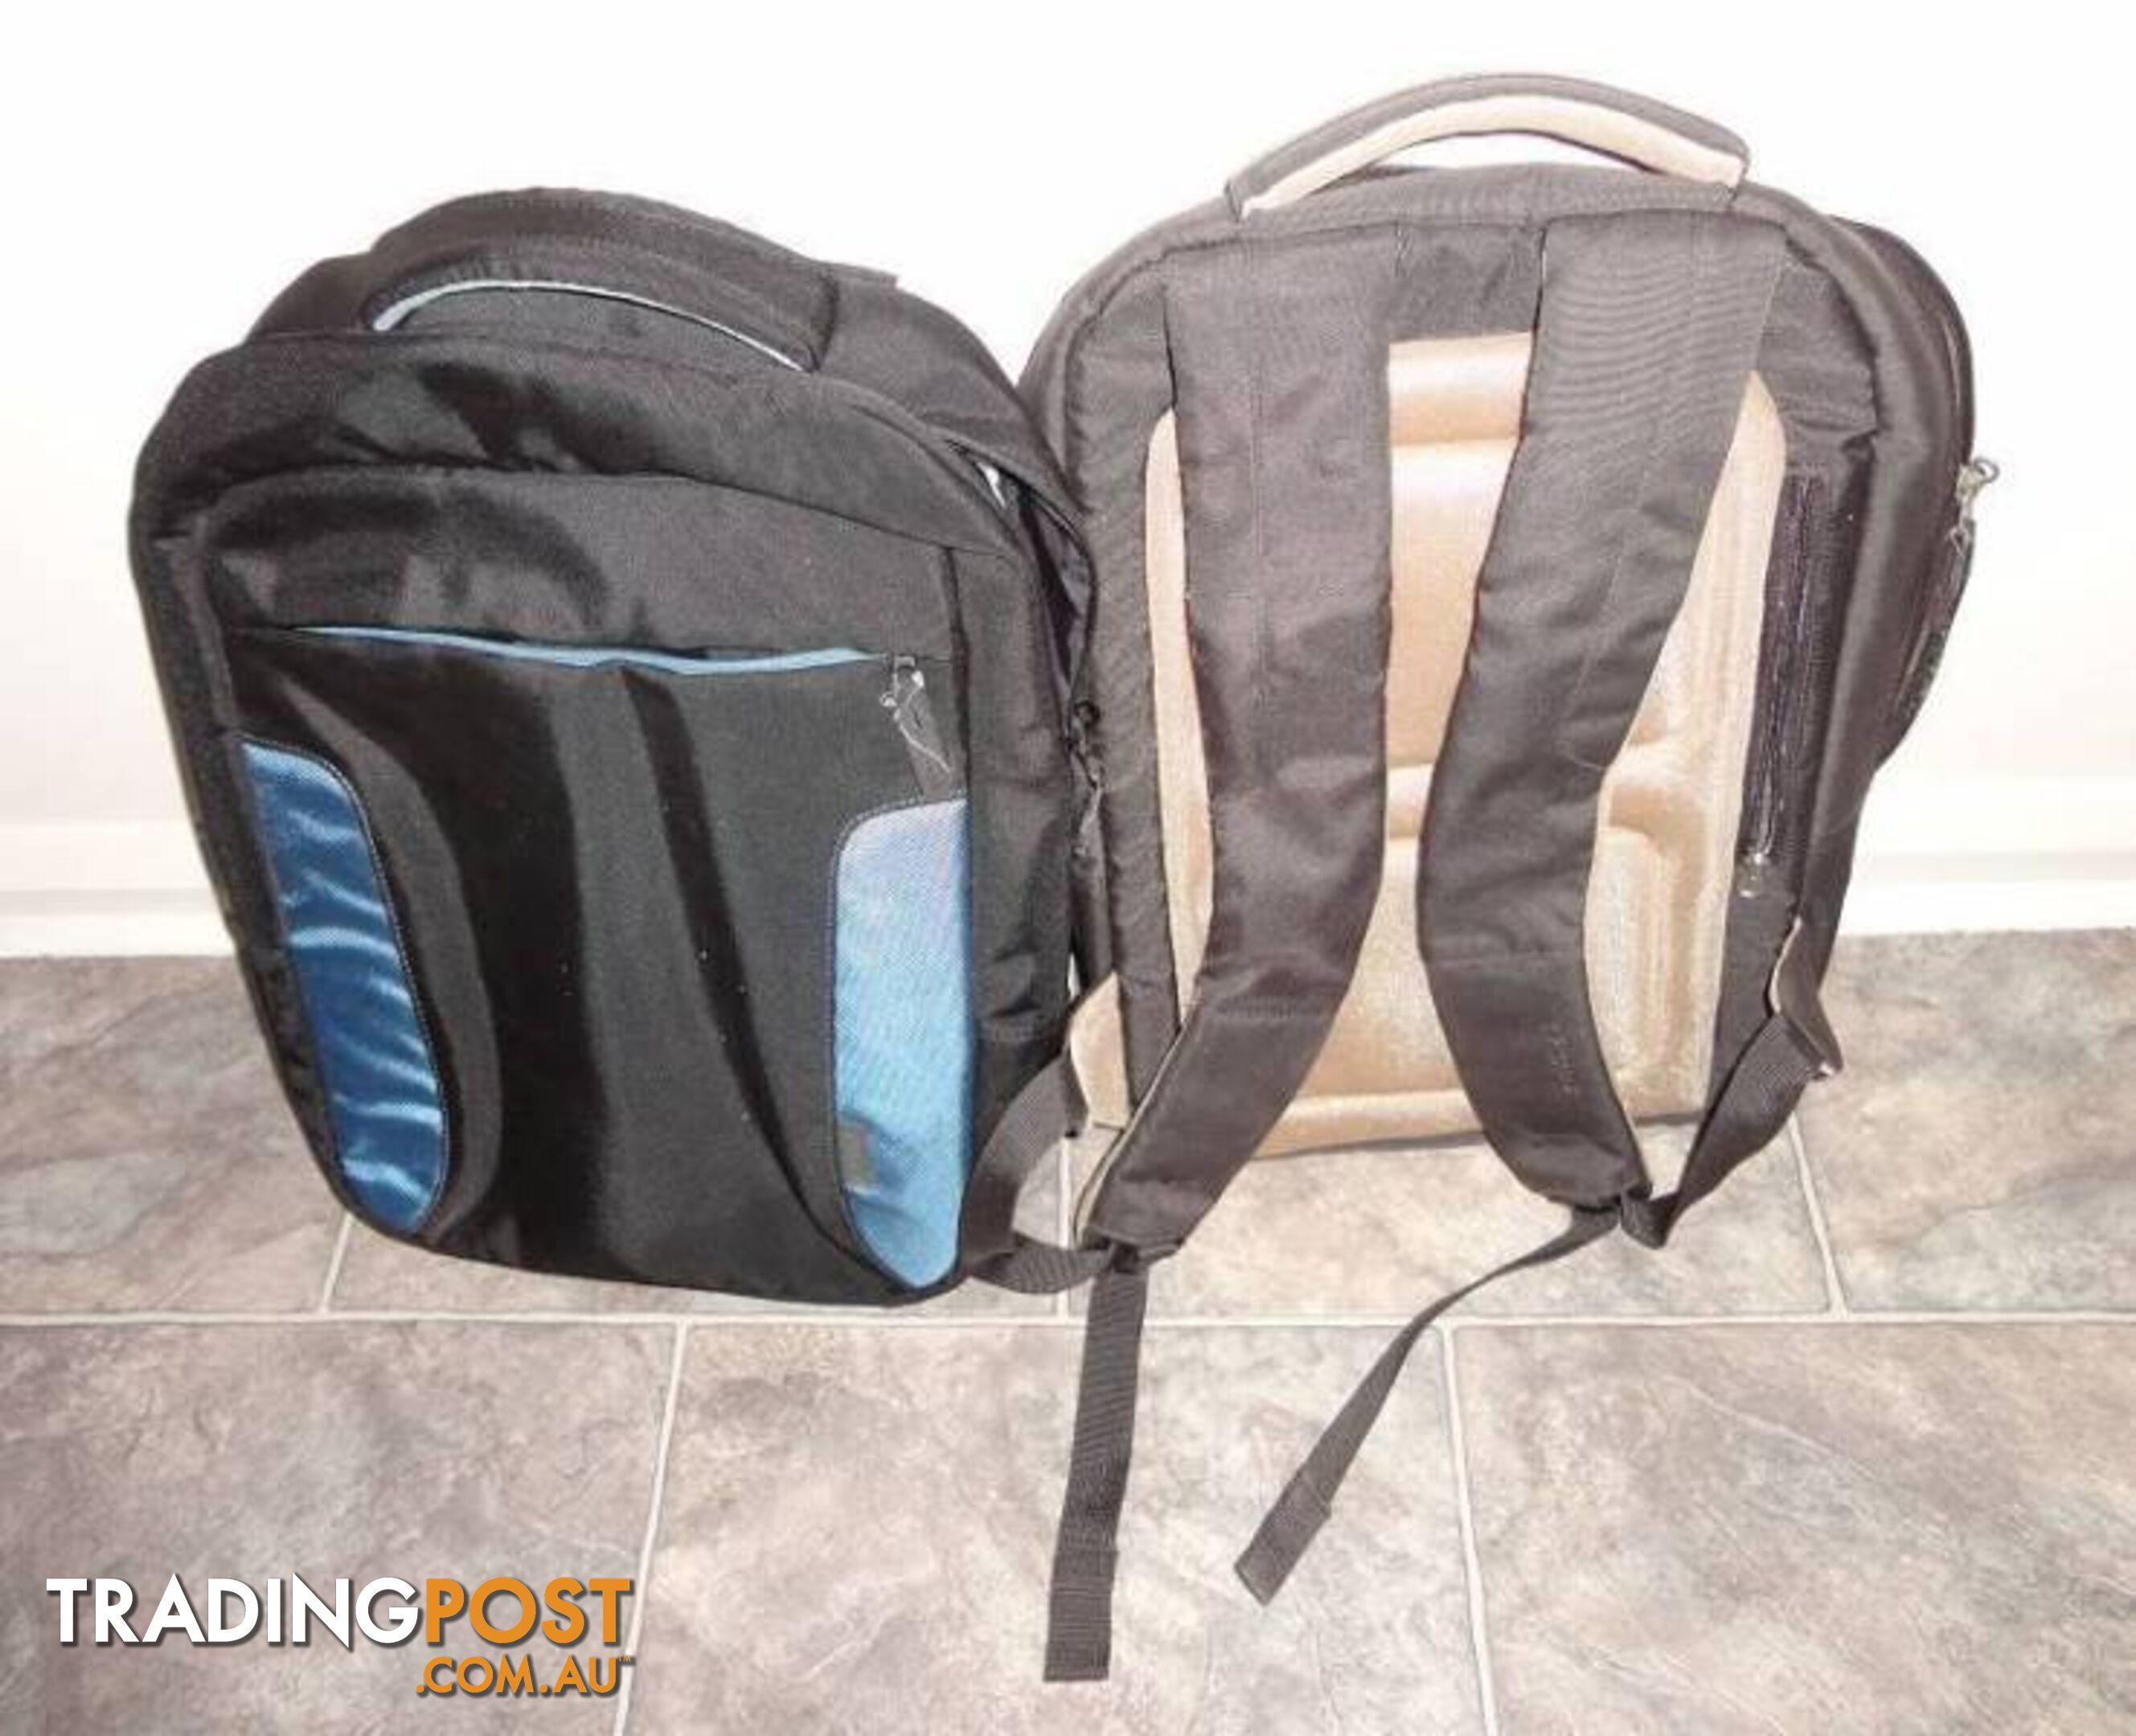 LAPTOP BACKPACK CARRY BAGS (2)